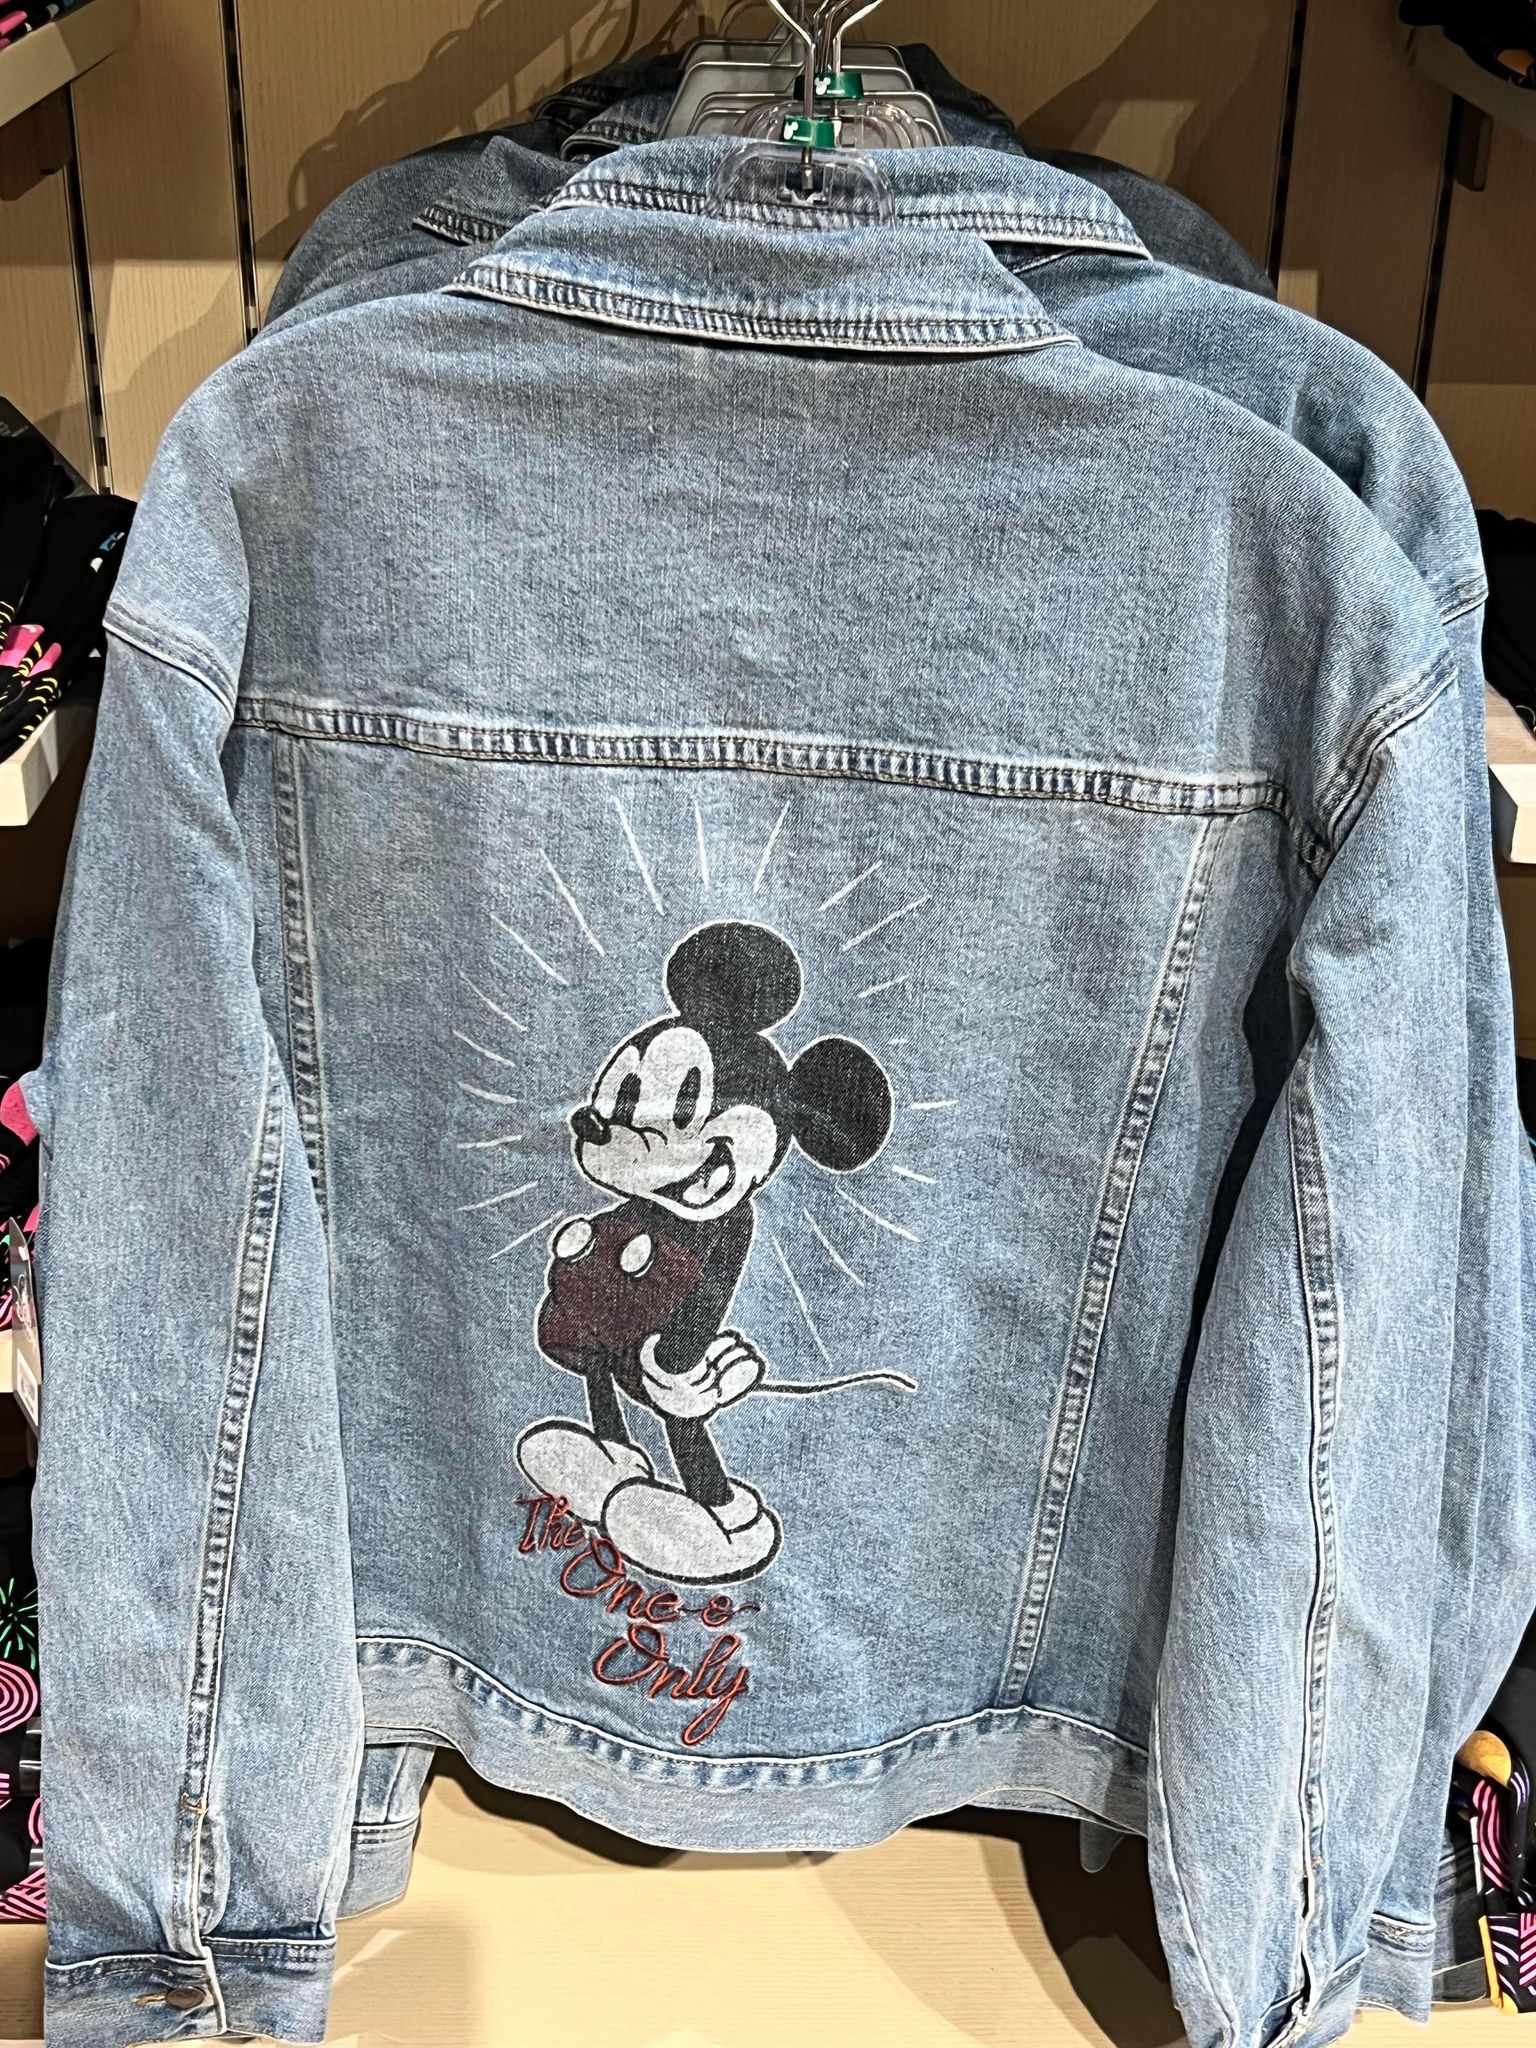 A Stylish New Jean Jacket Has Arrived at Walt Disney World, Featuring ...